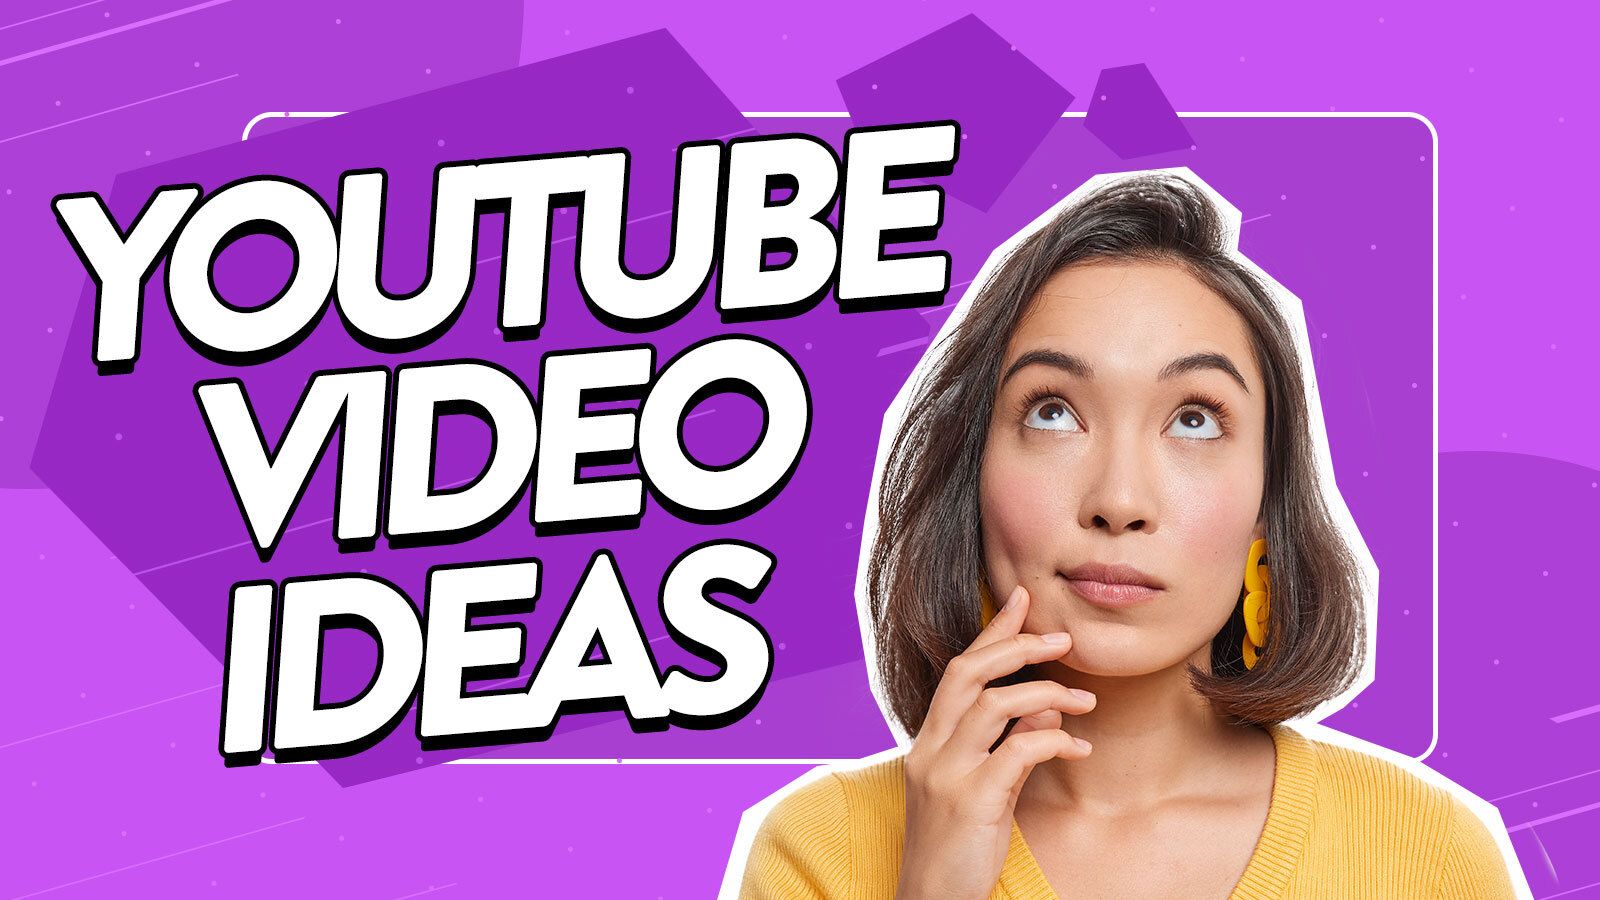 31 easy YouTube video ideas to get more views in 2023